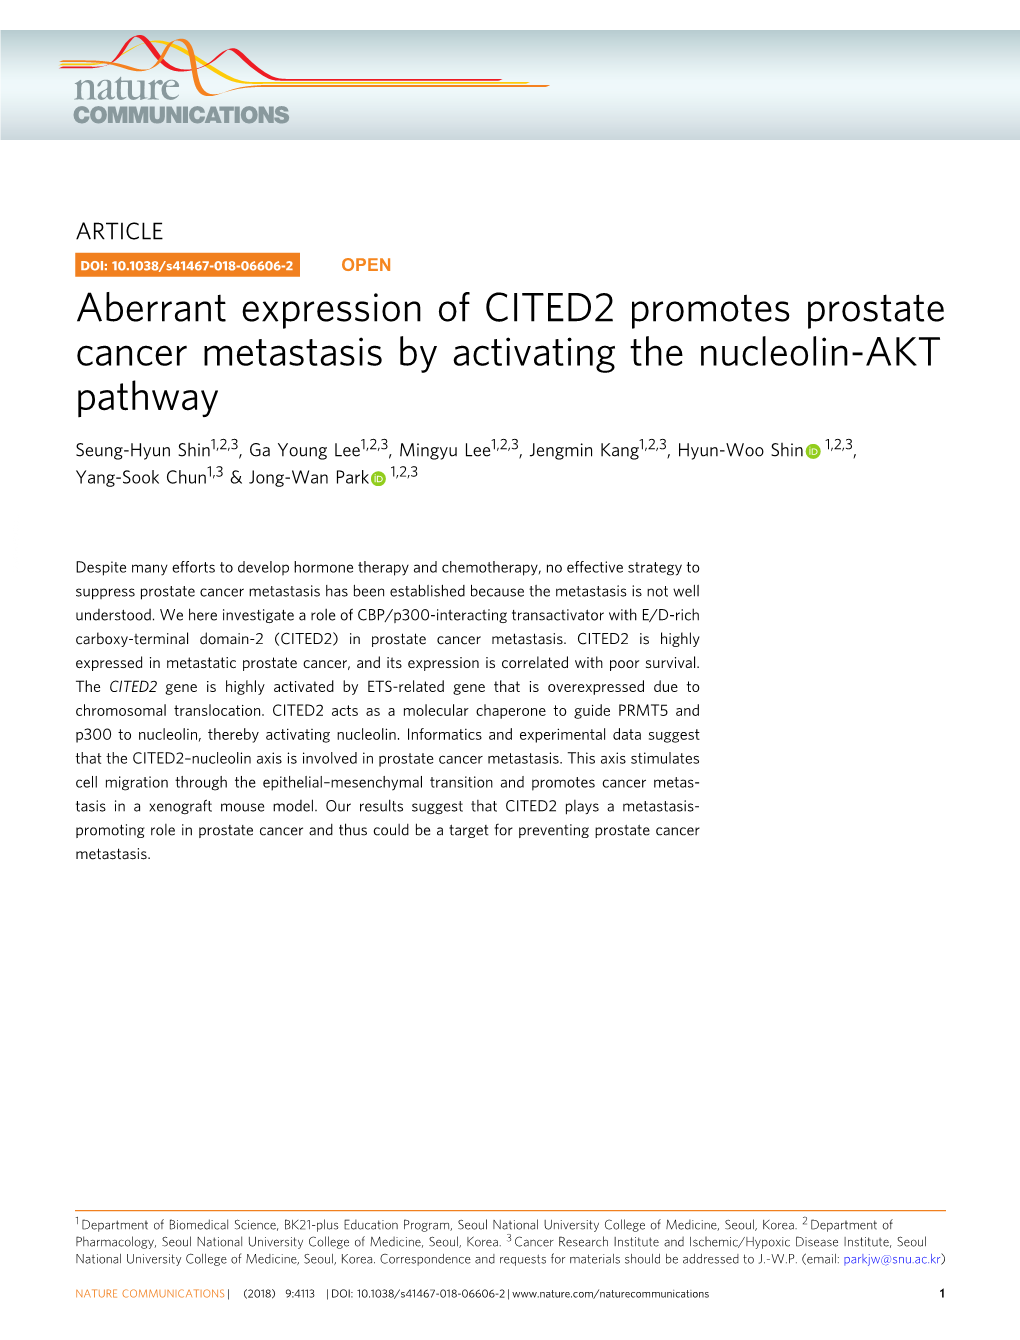 Aberrant Expression of CITED2 Promotes Prostate Cancer Metastasis by Activating the Nucleolin-AKT Pathway